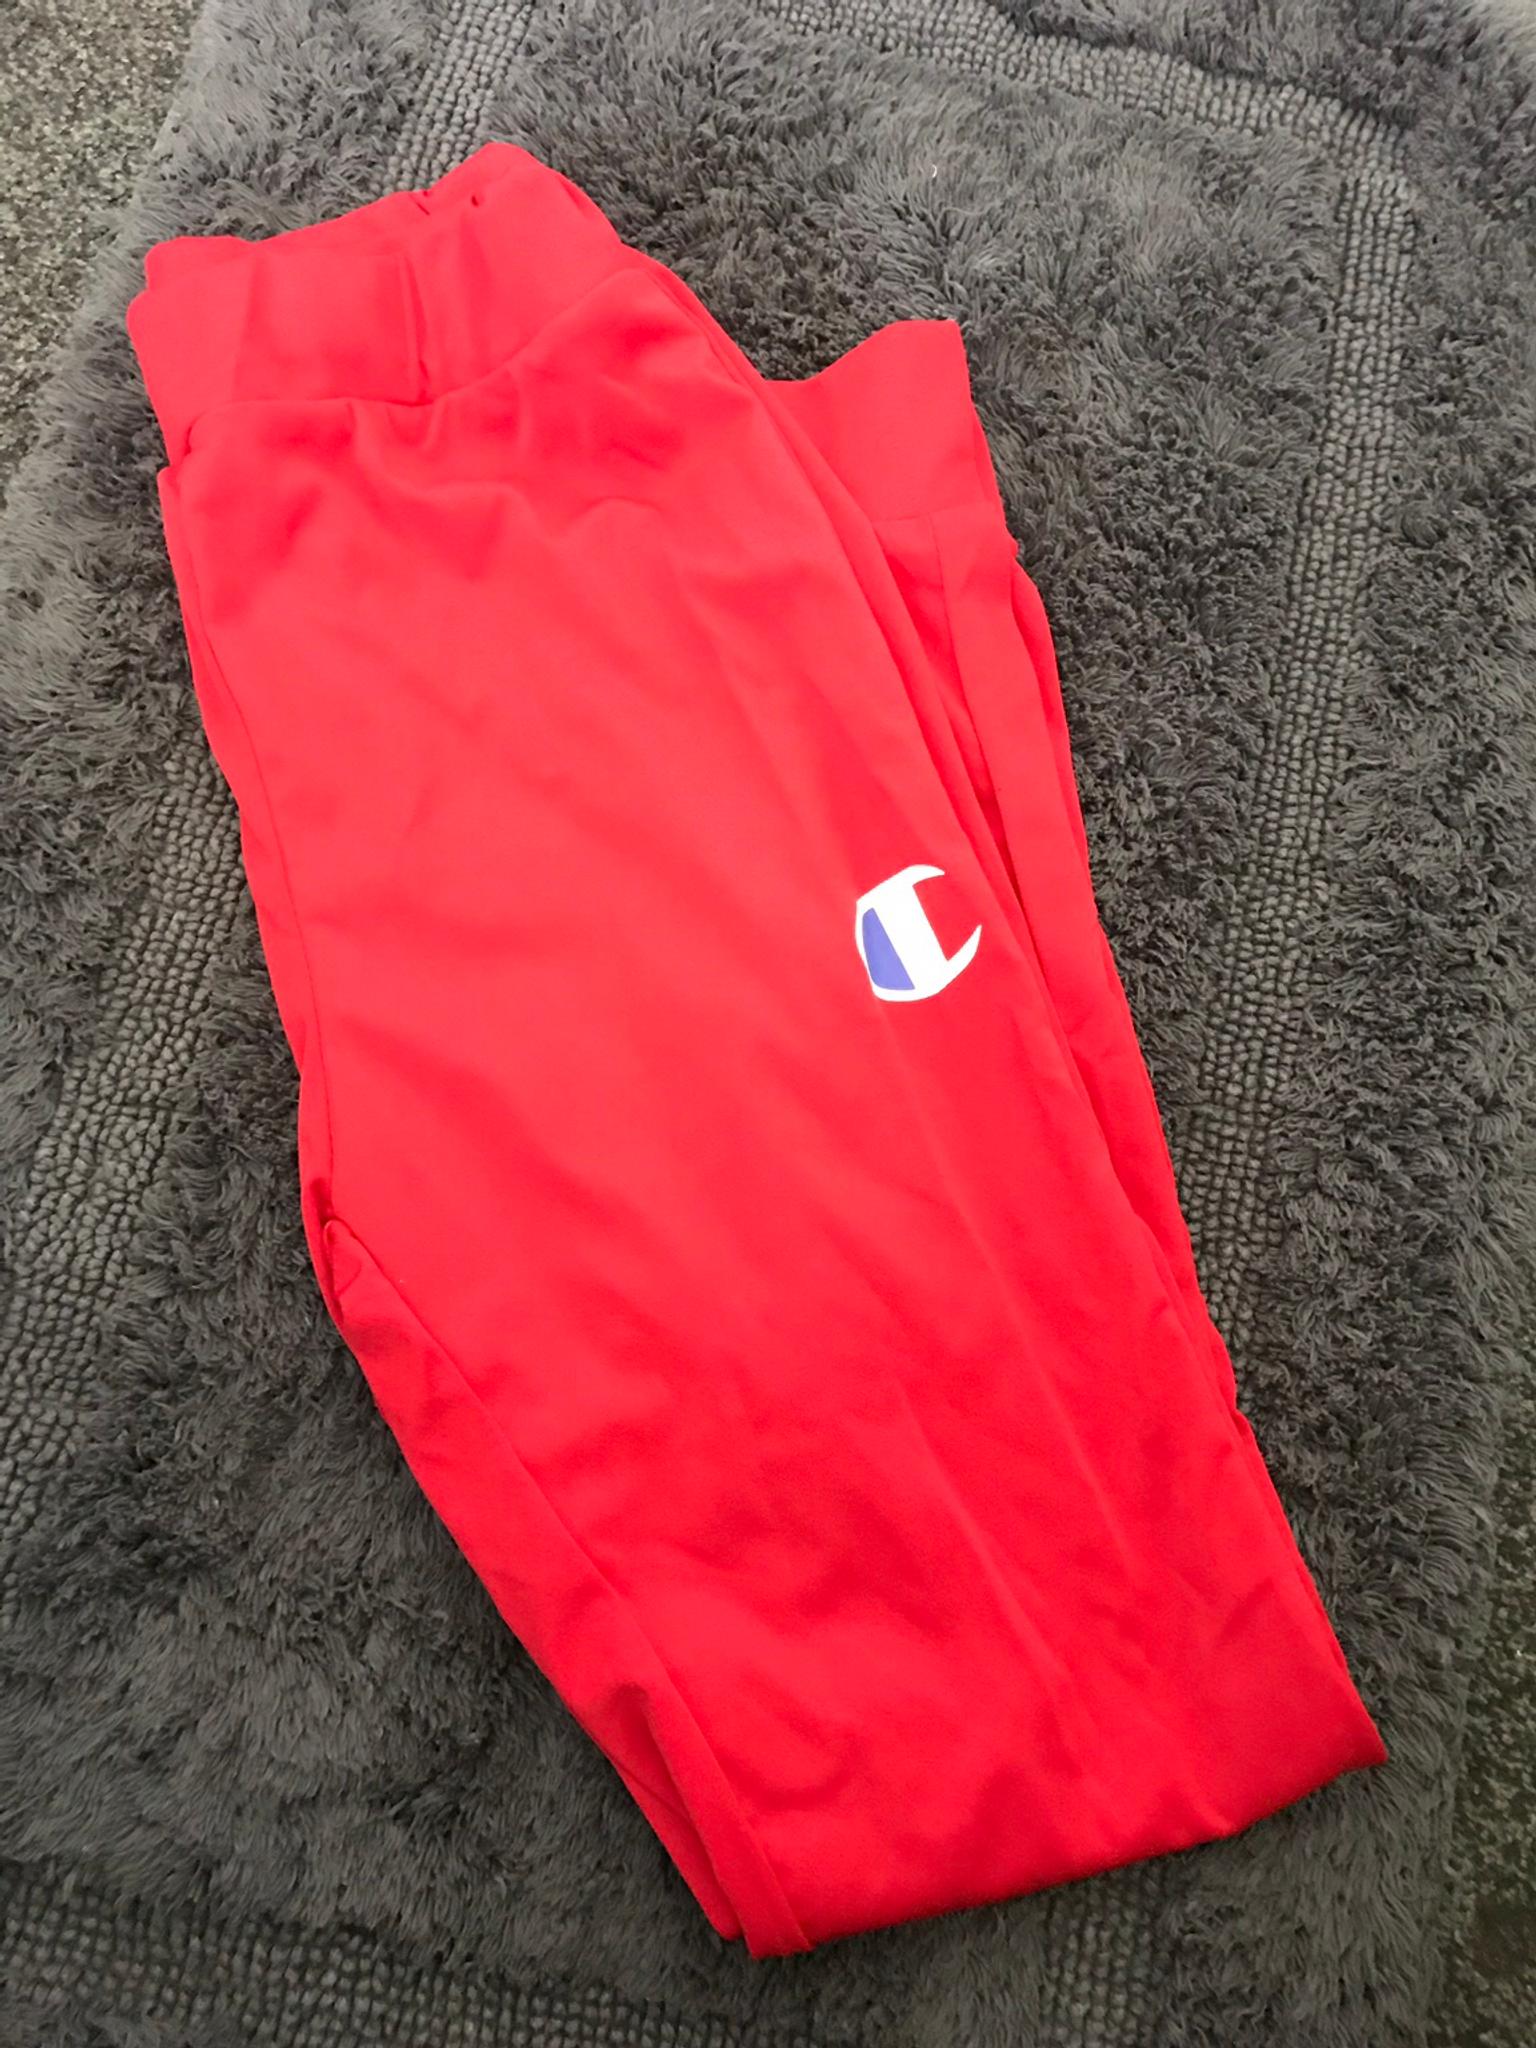 red champion tracksuit